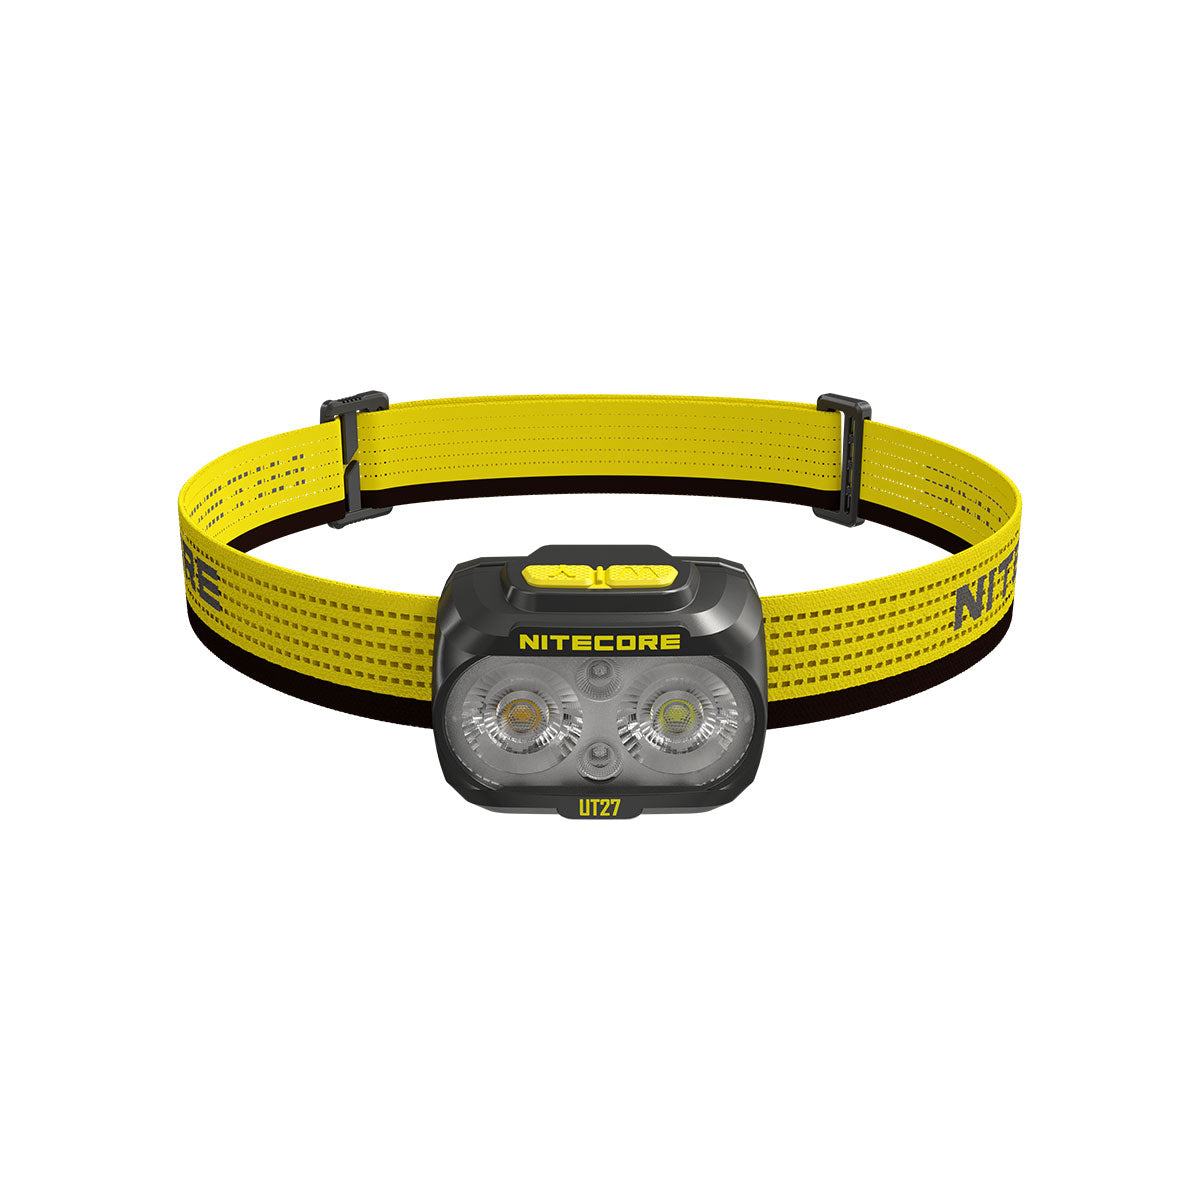 Nitecore UT27 White and Red Light LED Rechargeable Headlamp (Pro Package) (800 Lumens)